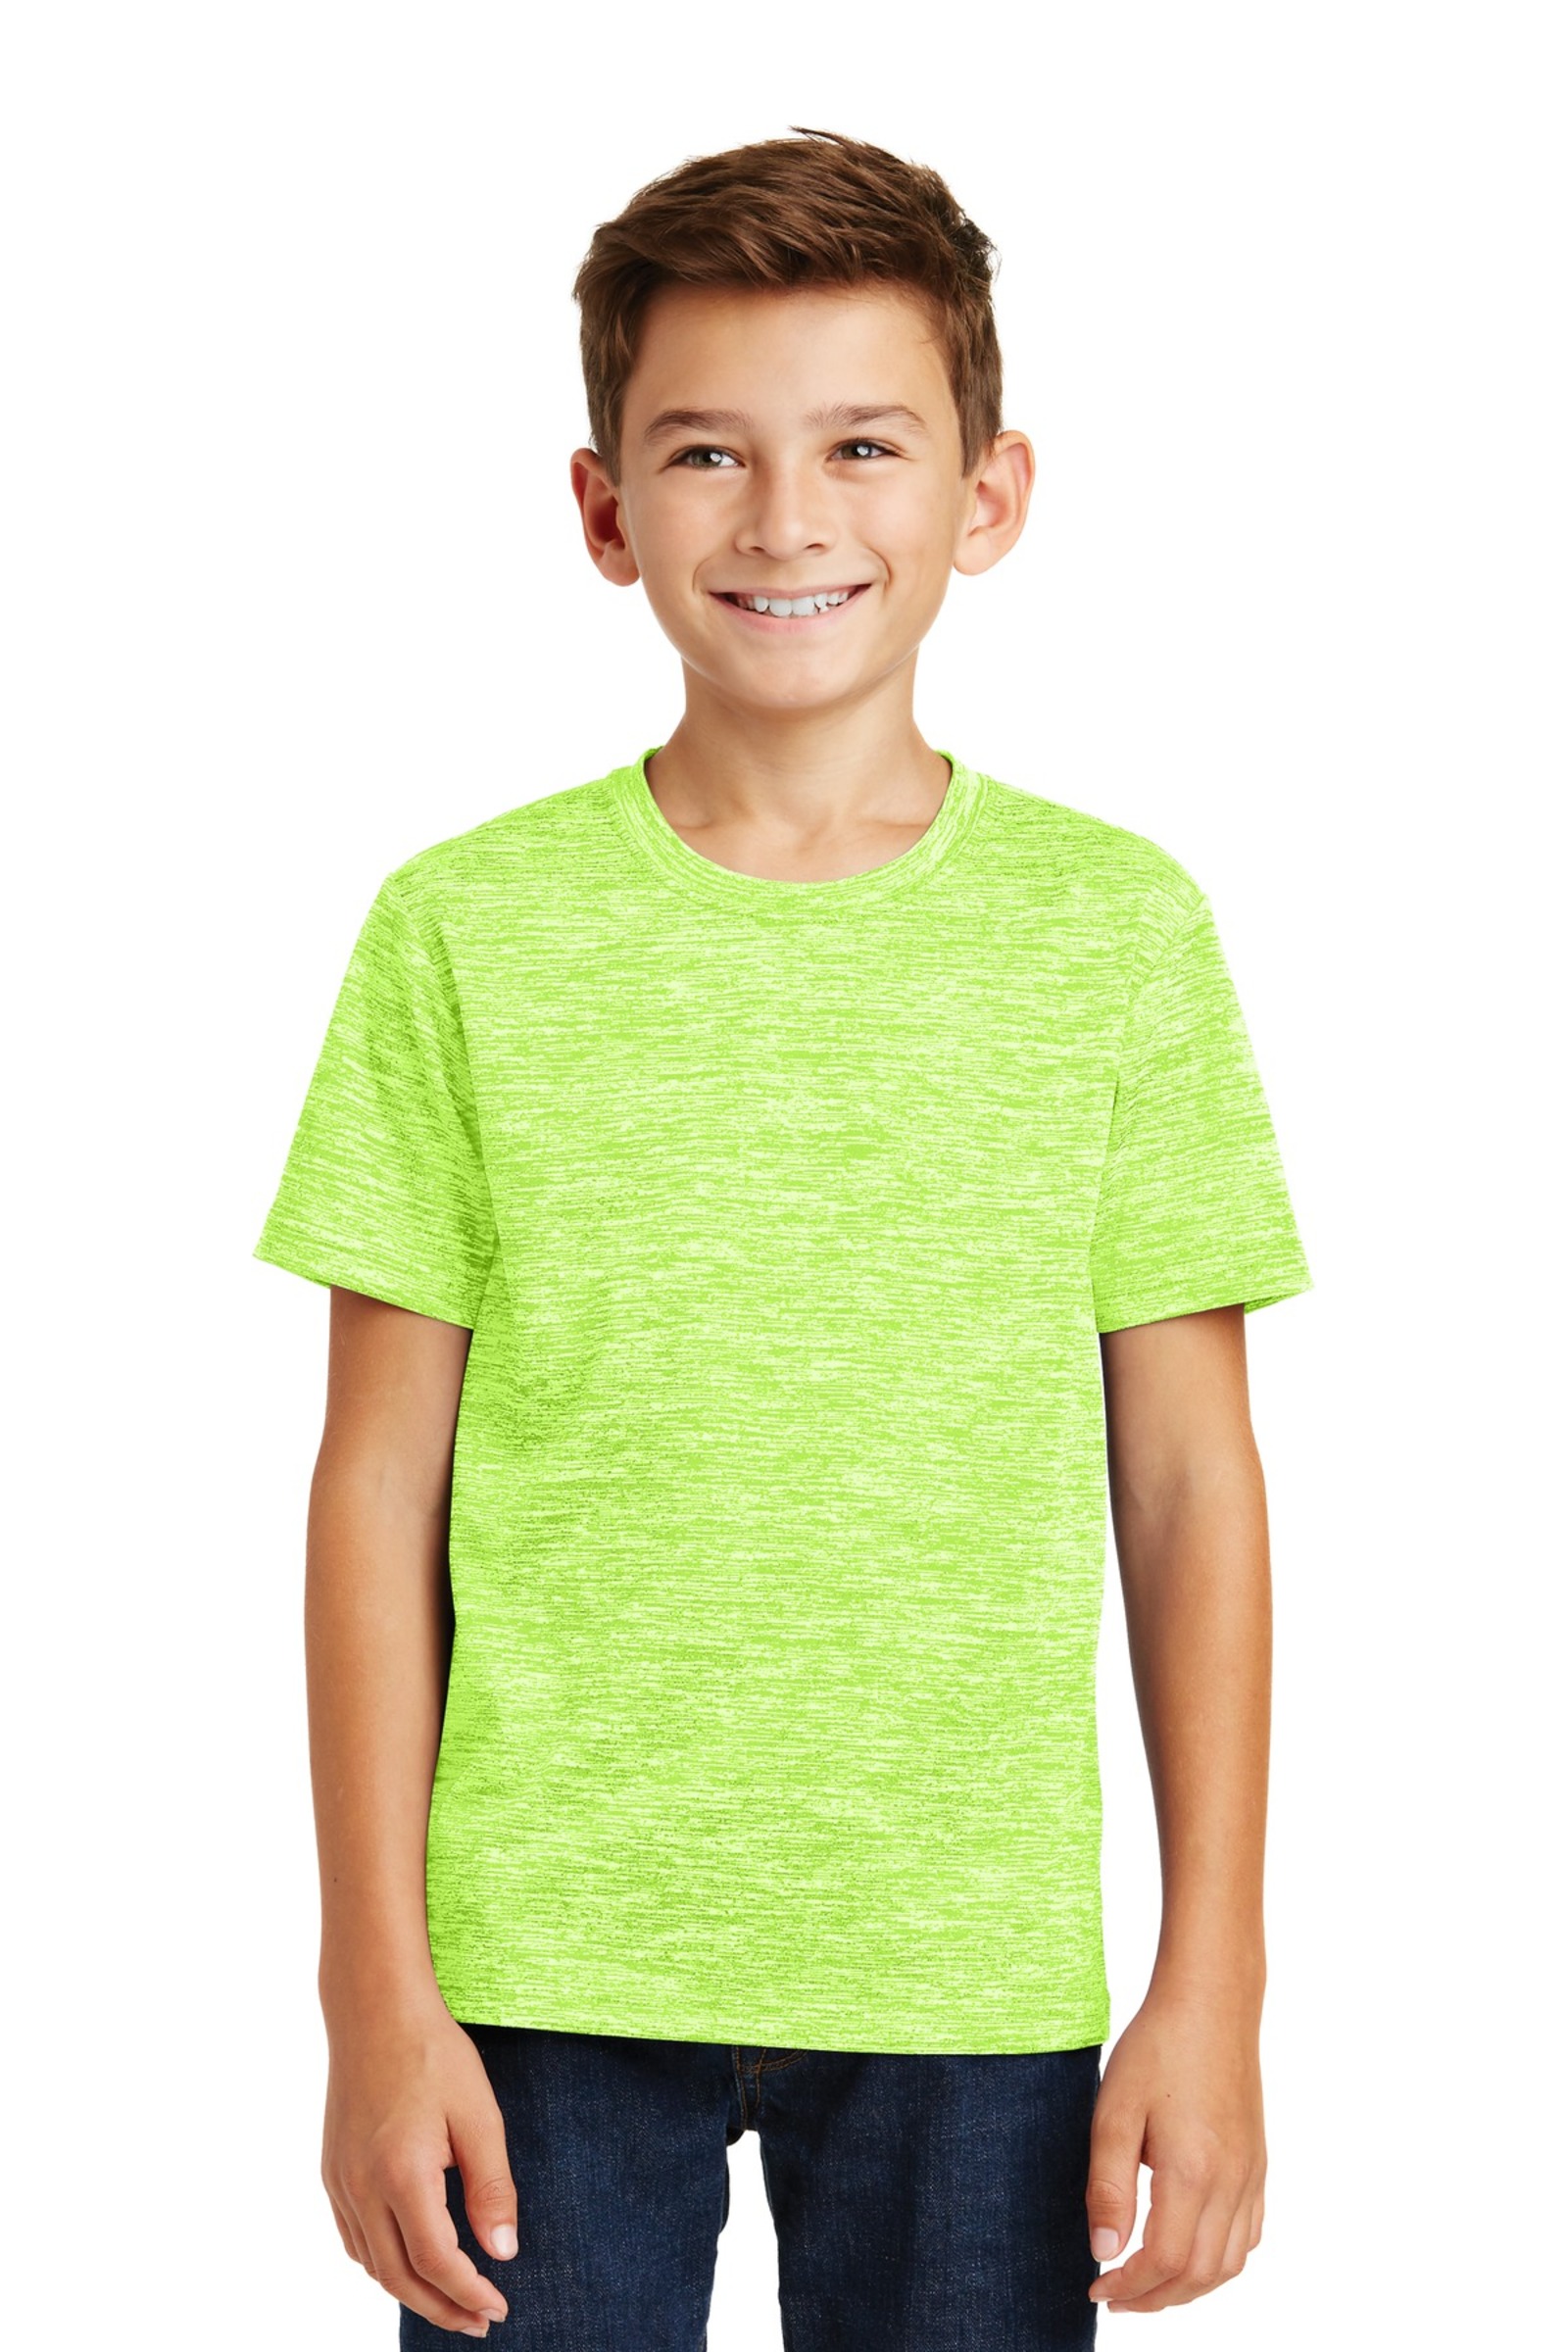 Sport-Tek Embroidered Youth PosiCharge Electric Heather Tee